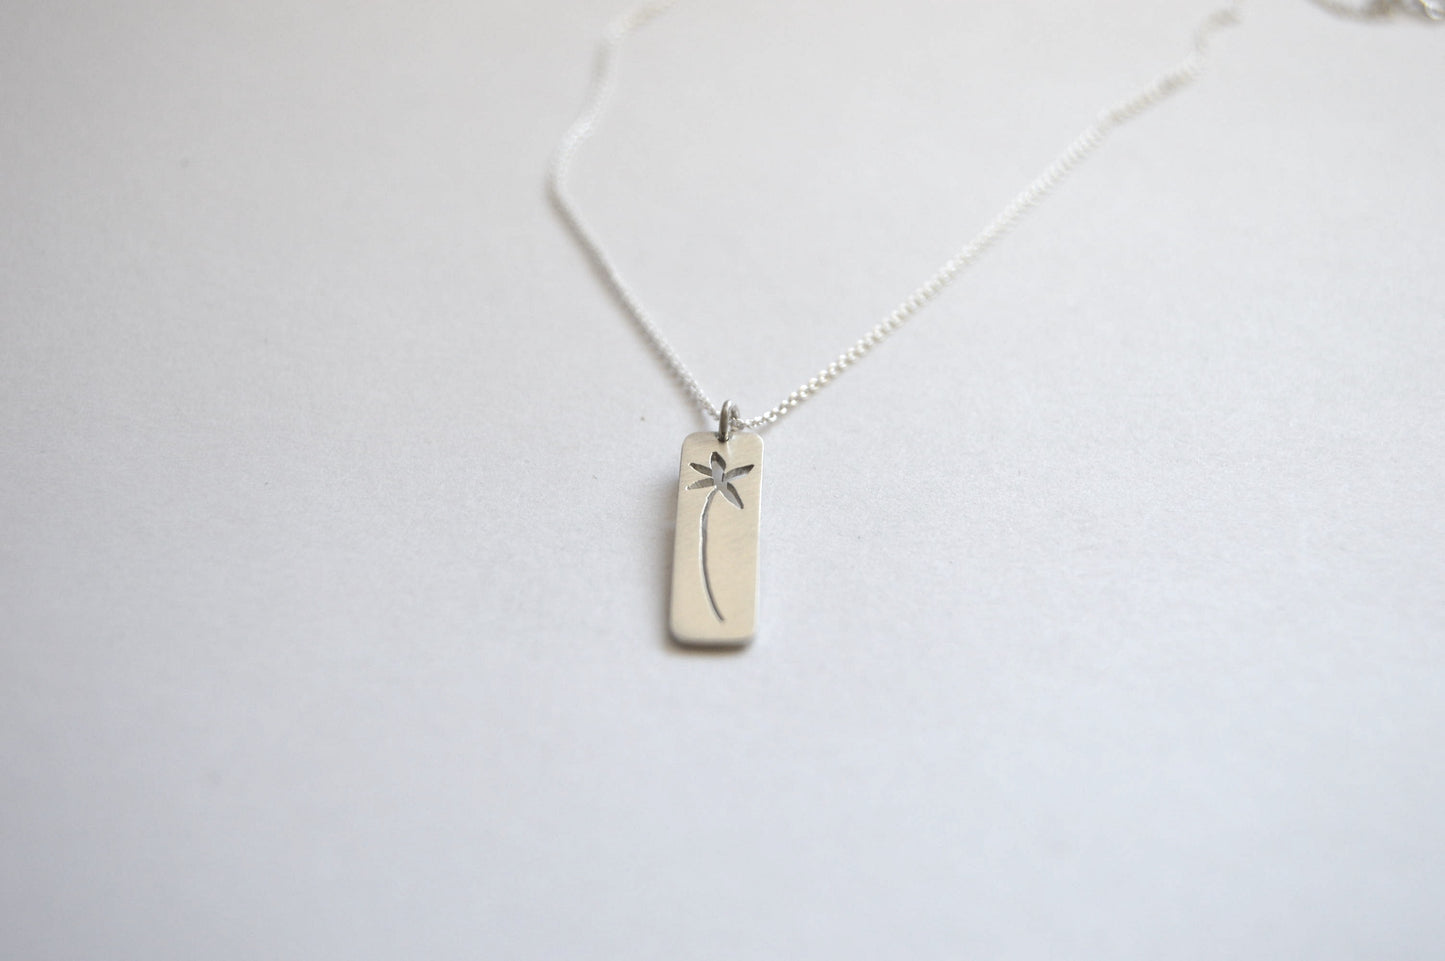  Botanical Collection Pendant with Botanical cut-out inspired by a Buchu Flower